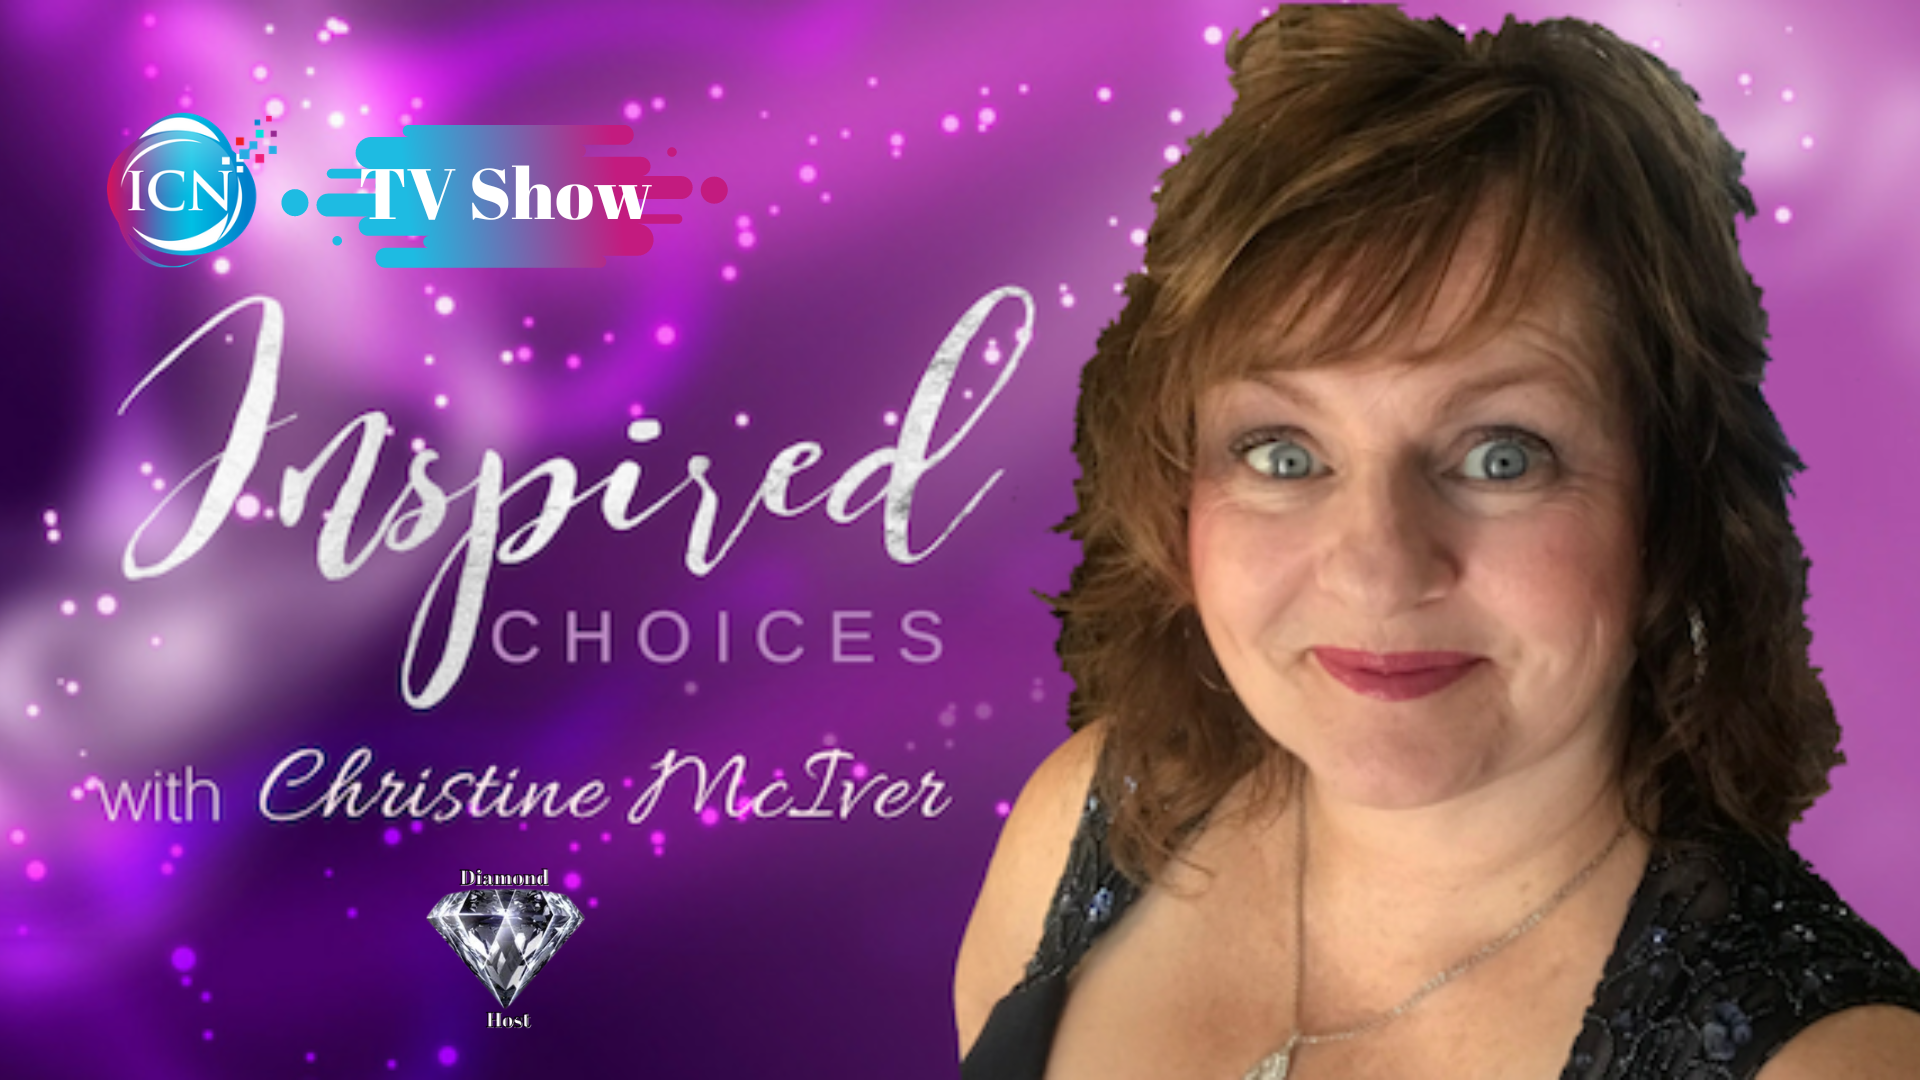 Inspired Choices with Christine McIver